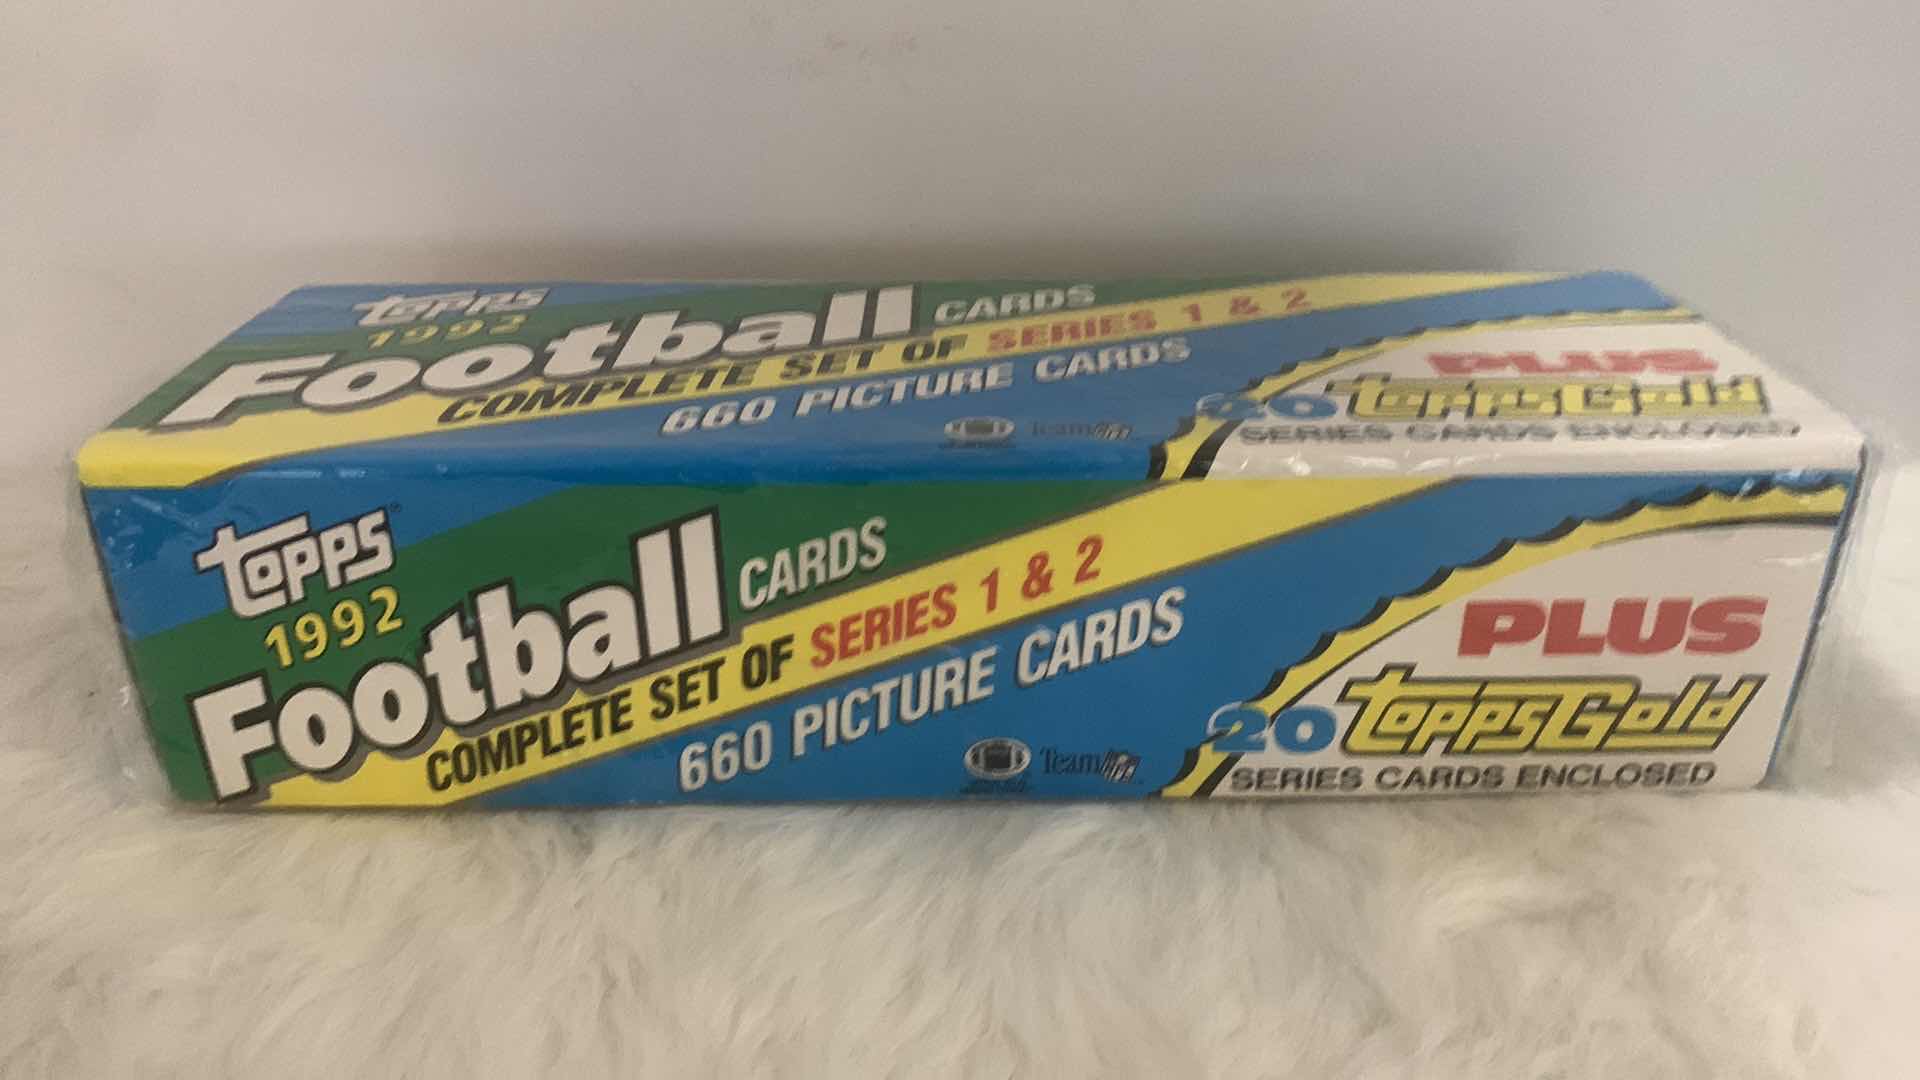 Photo 2 of COLLECTIBLE TOPPS  1992  FOOTBALL CARDS COMPLETE SET OF SERIES 1 & 2